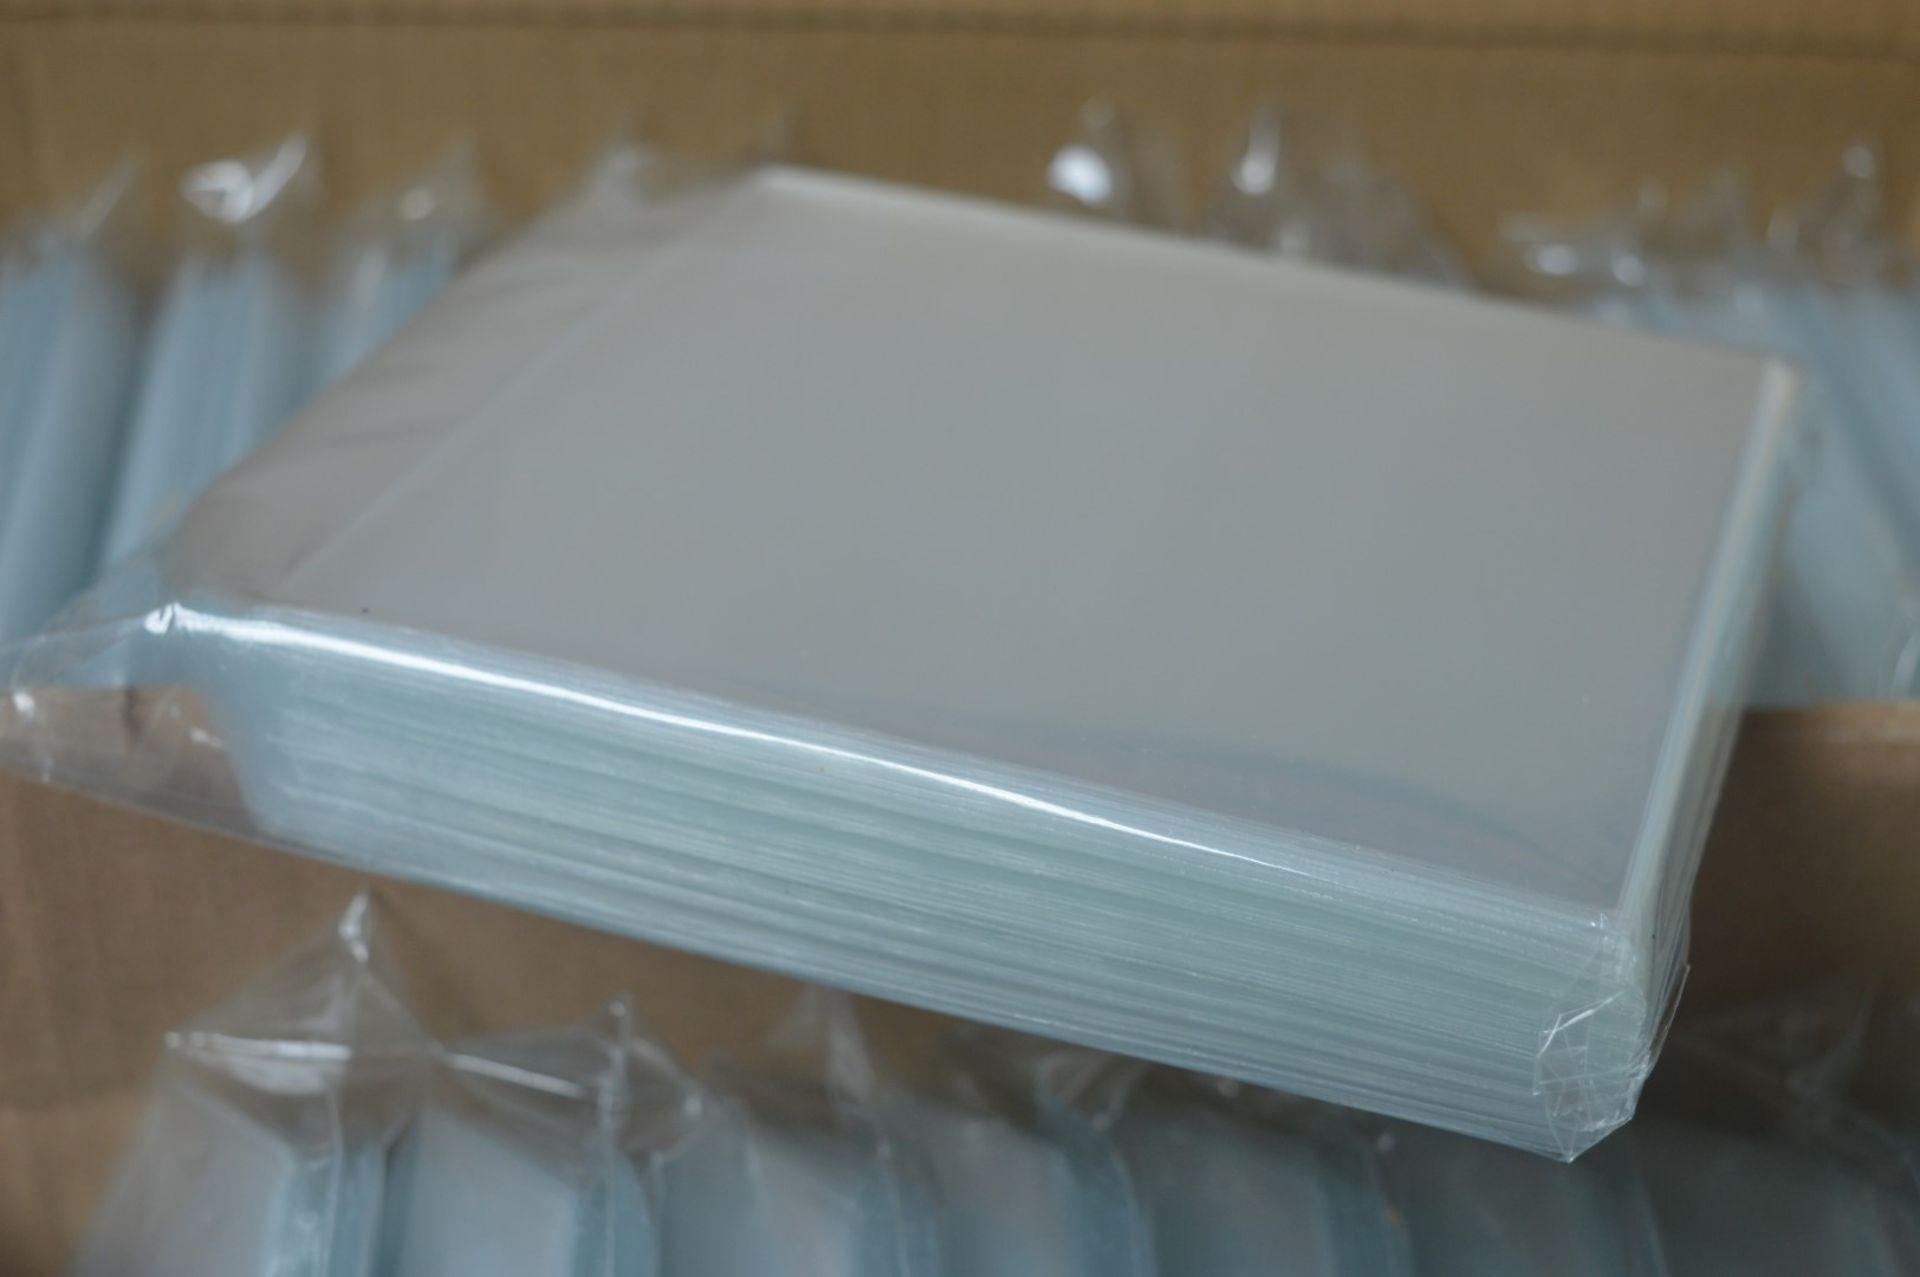 1,000 x Clear Plastic CD or DVD Sleeves With Flaps - Includes 10 x Packs of 100 Sleeves - Brand - Image 2 of 2